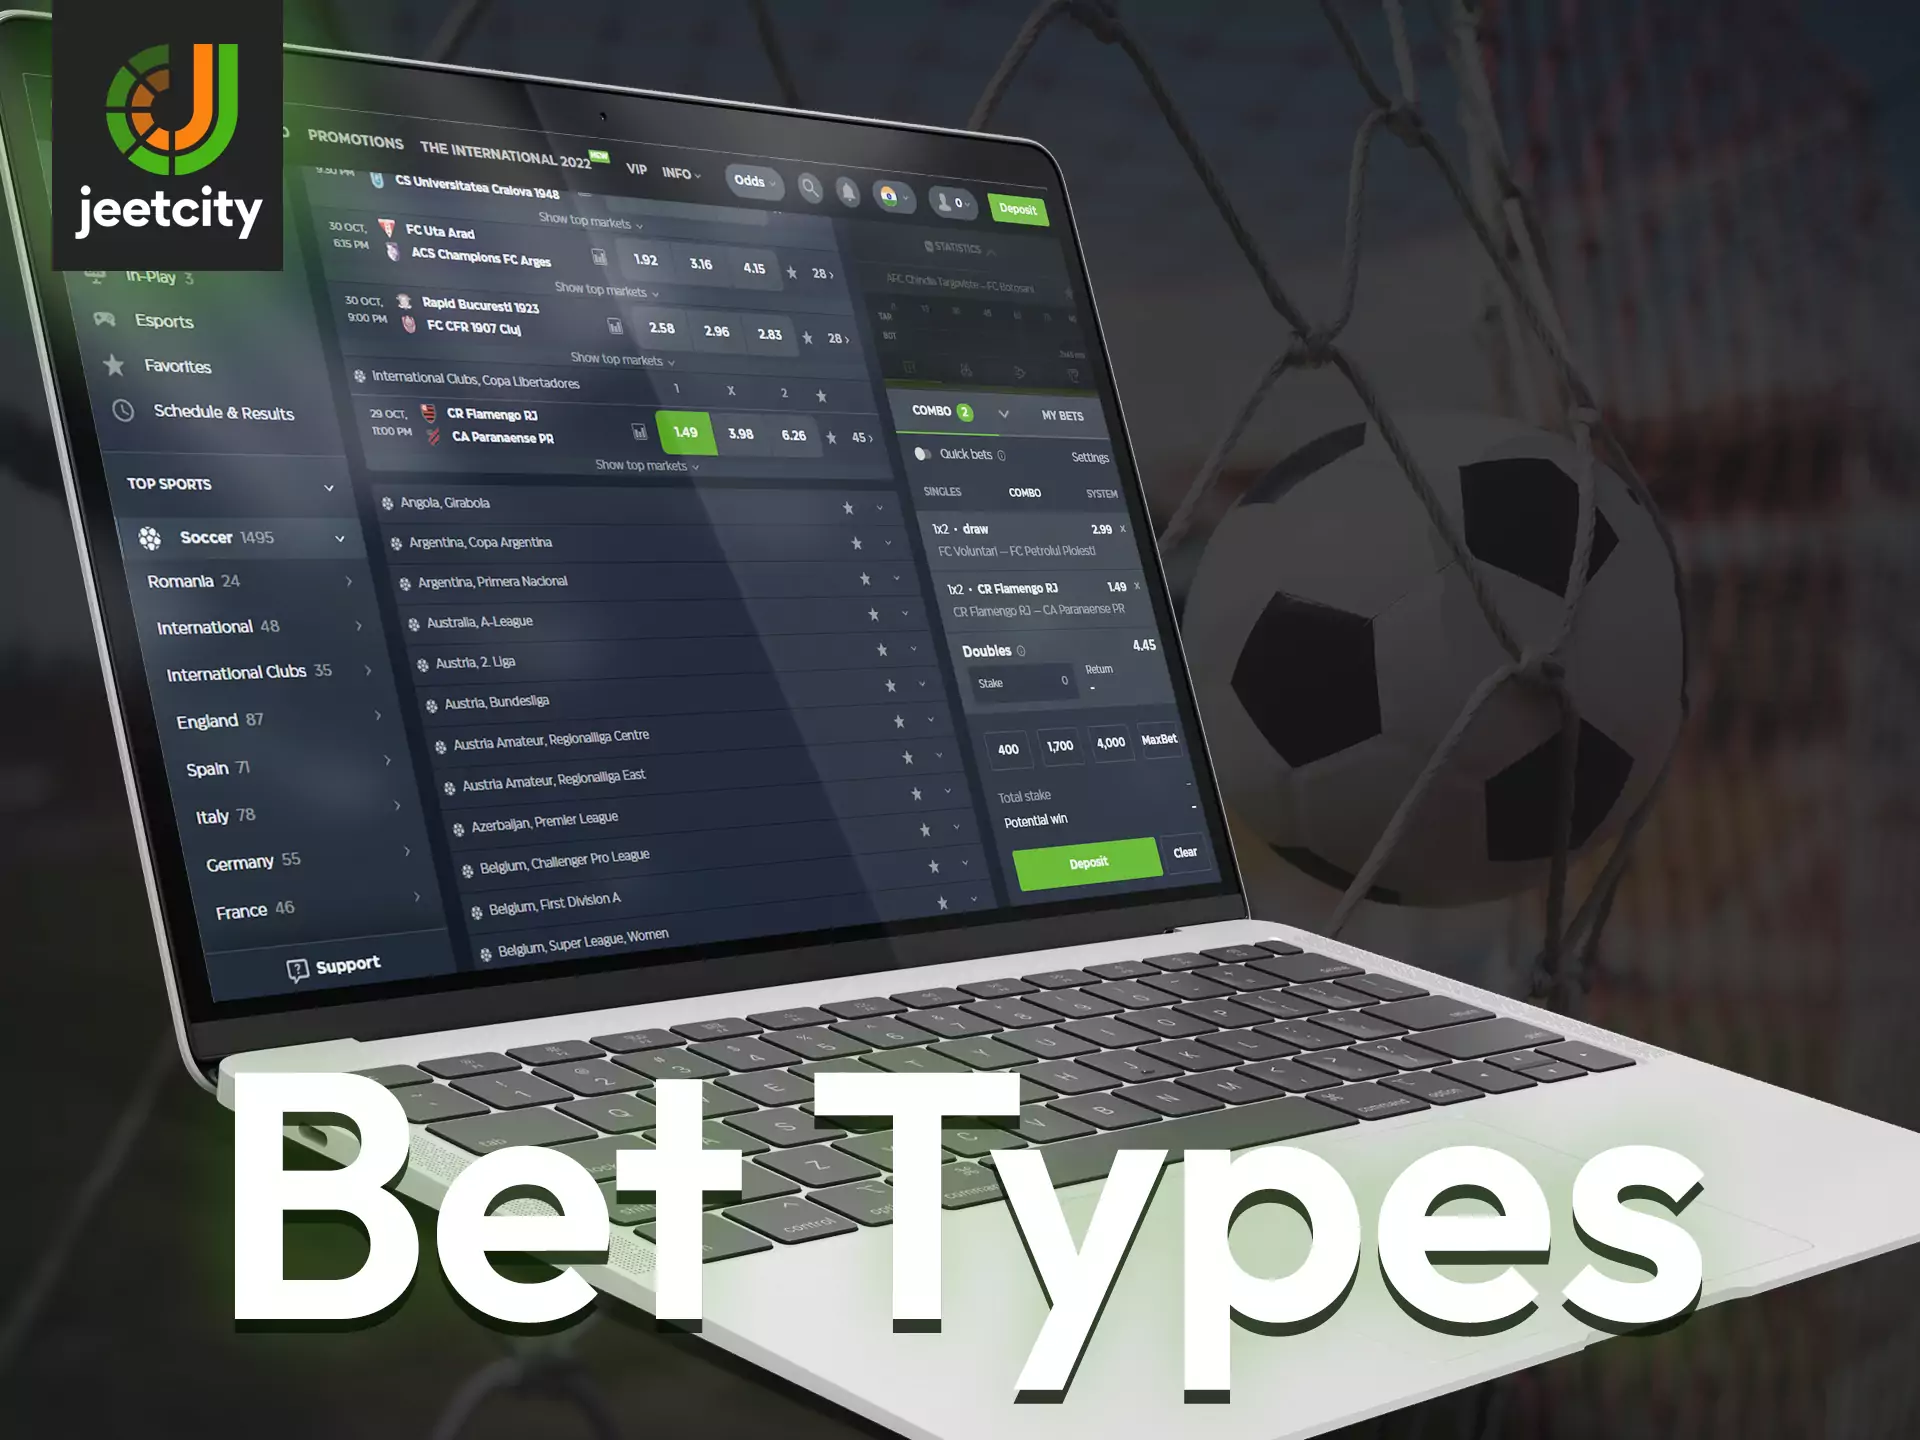 JeetCity offers various types of bets for your convenience.